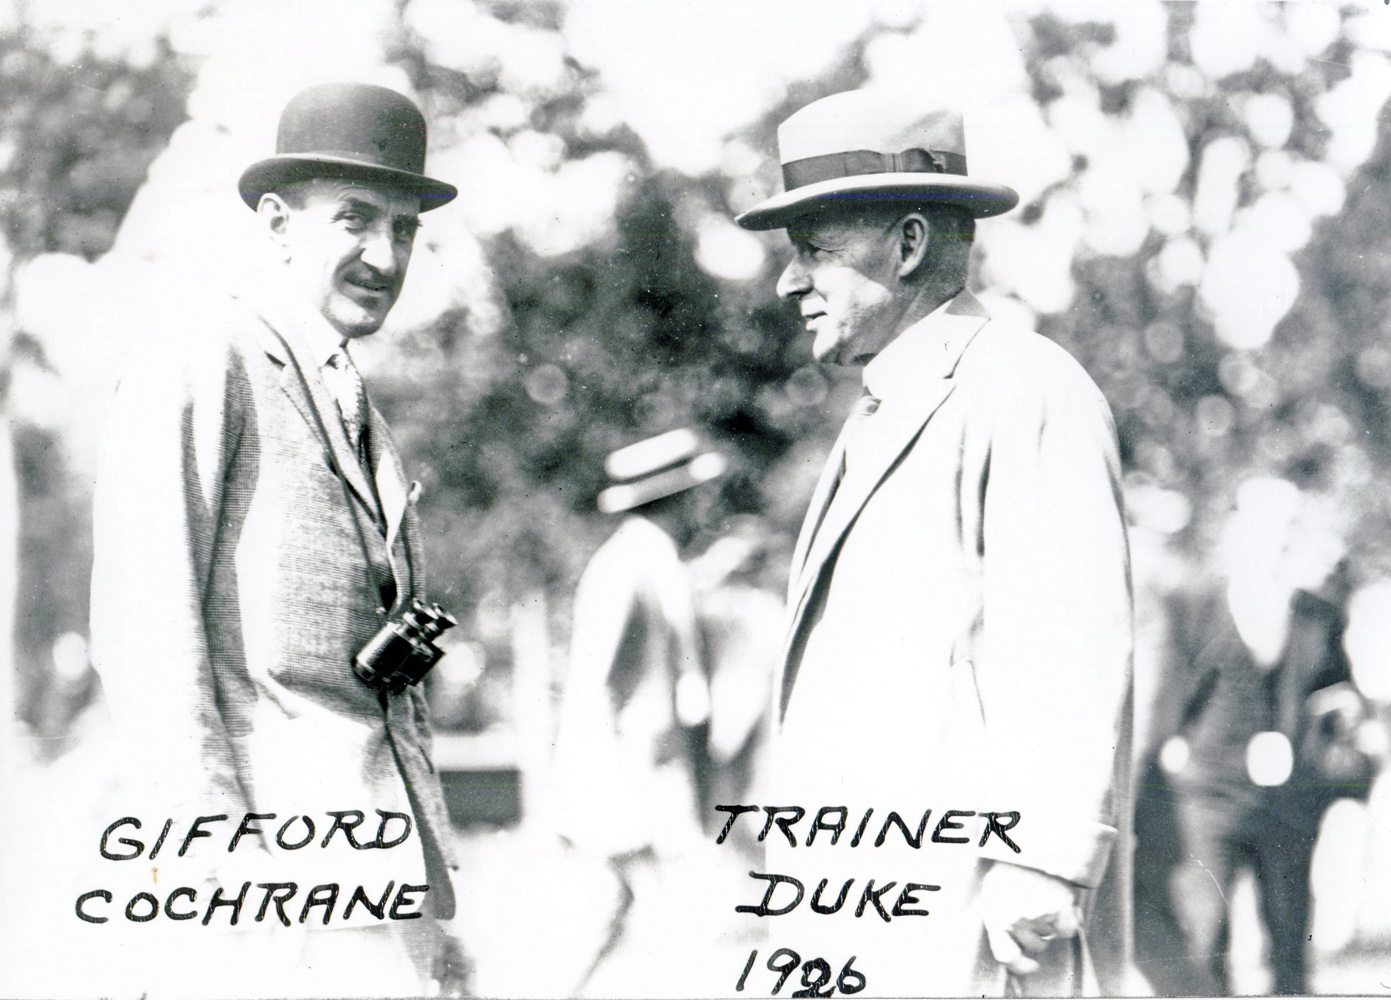 Gifford Cochrane and trainer William Duke (C. C. Cook/Museum Collection)